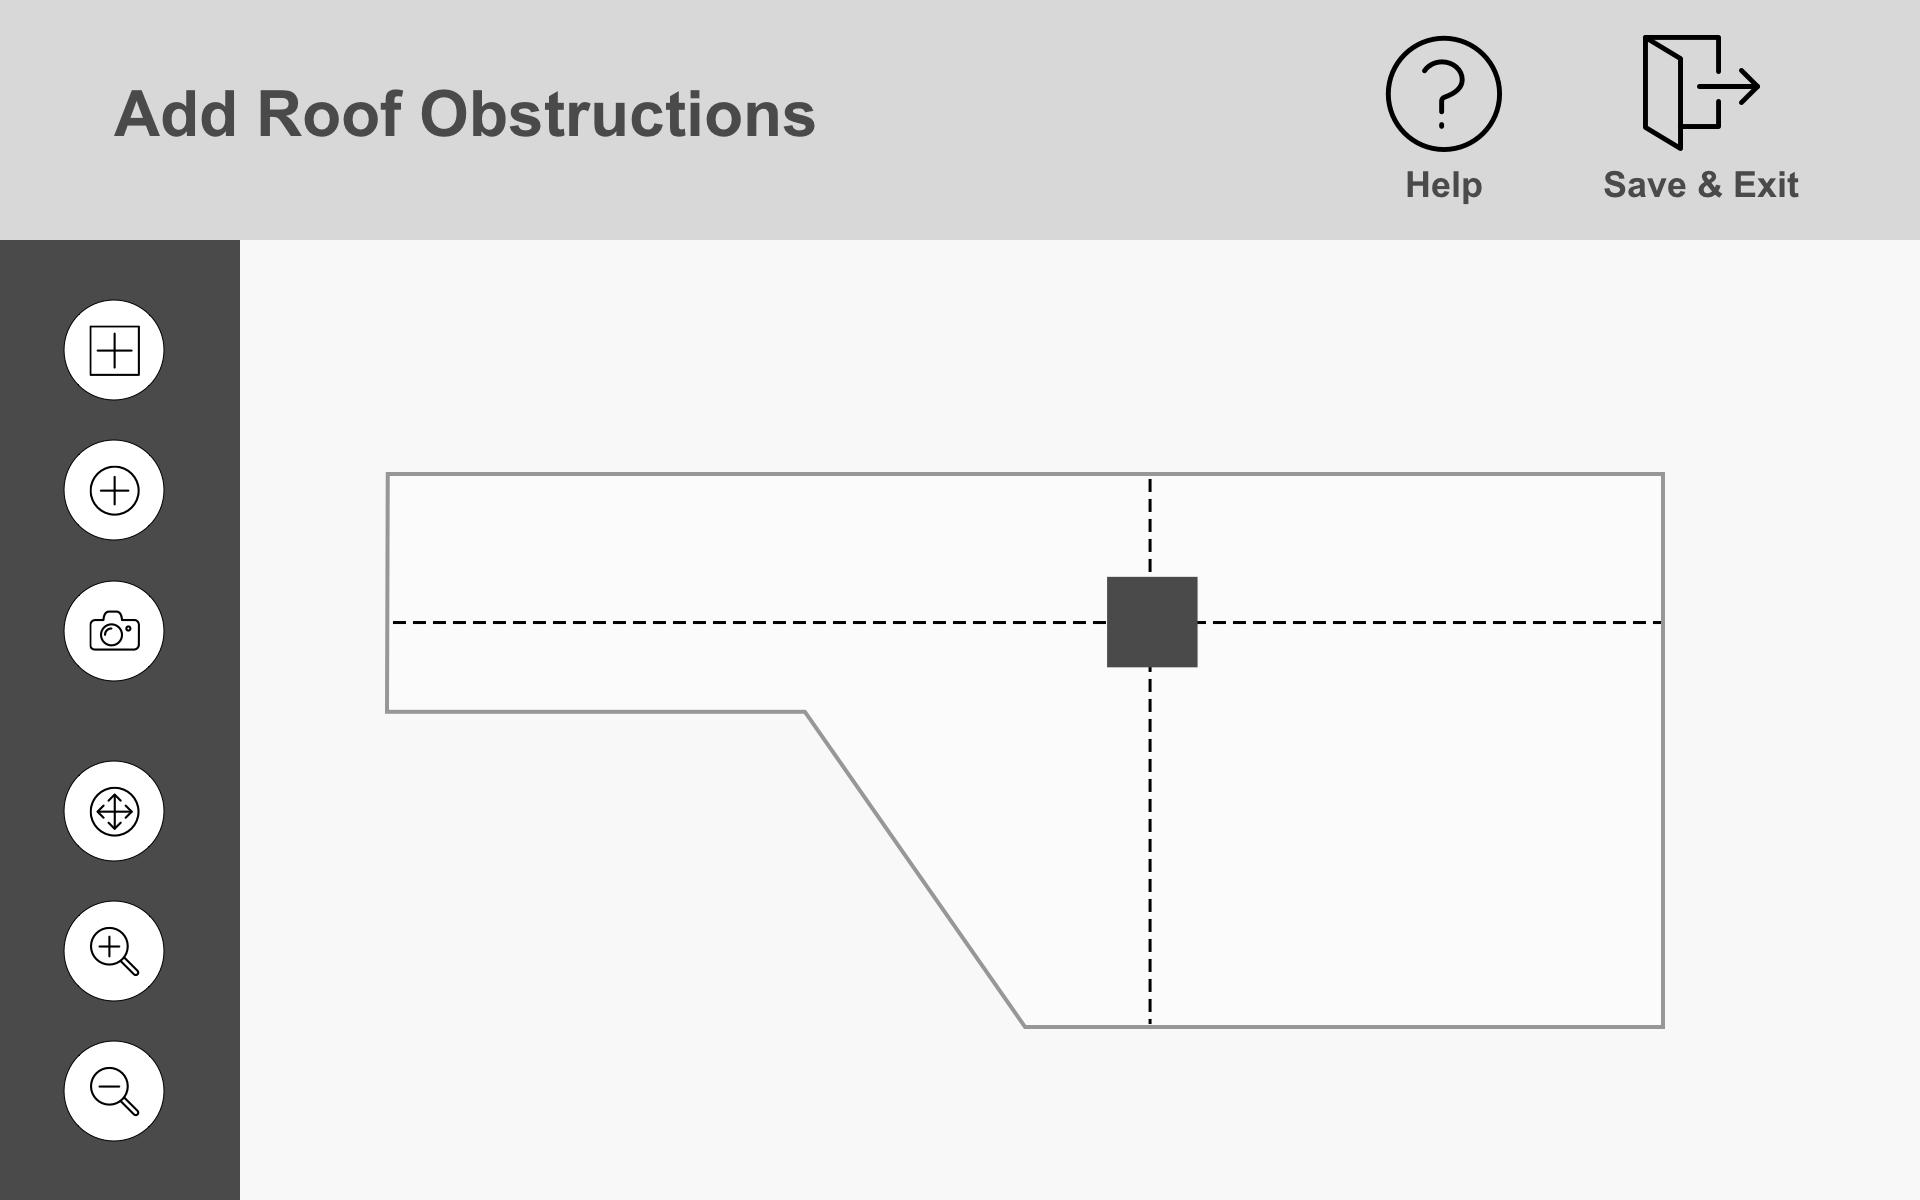 4.0.0_Structural_Roof_Obstructions-Instructions.png